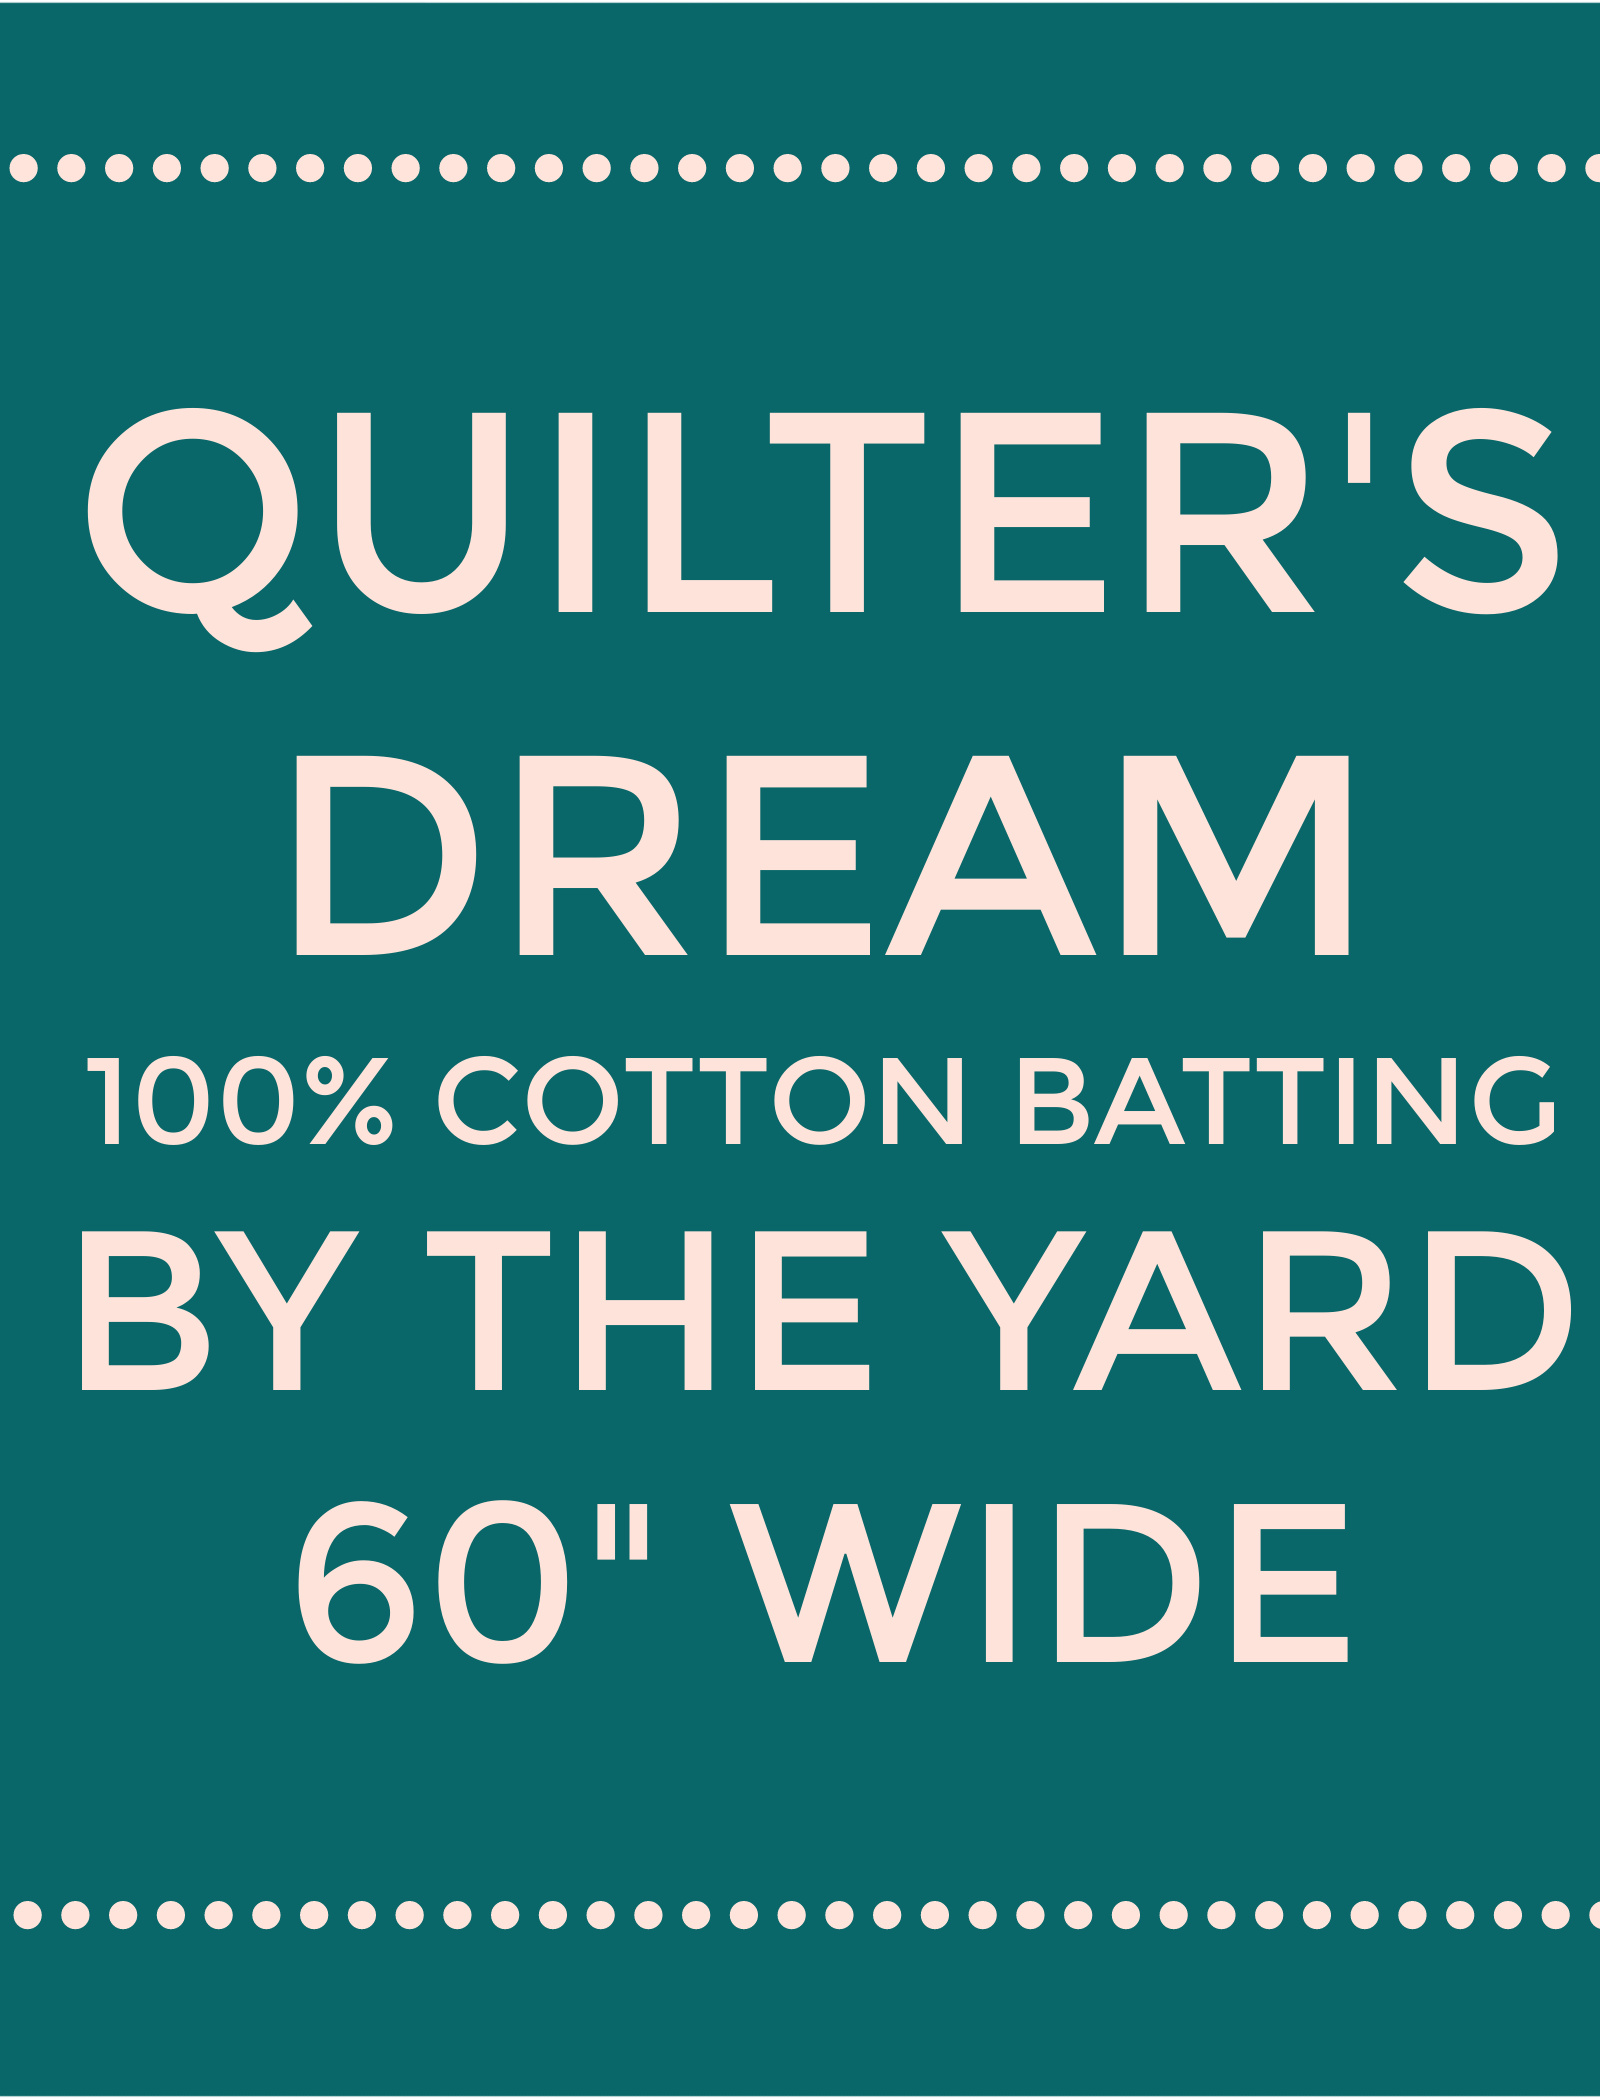 The characteristics and benefits of polyester batting